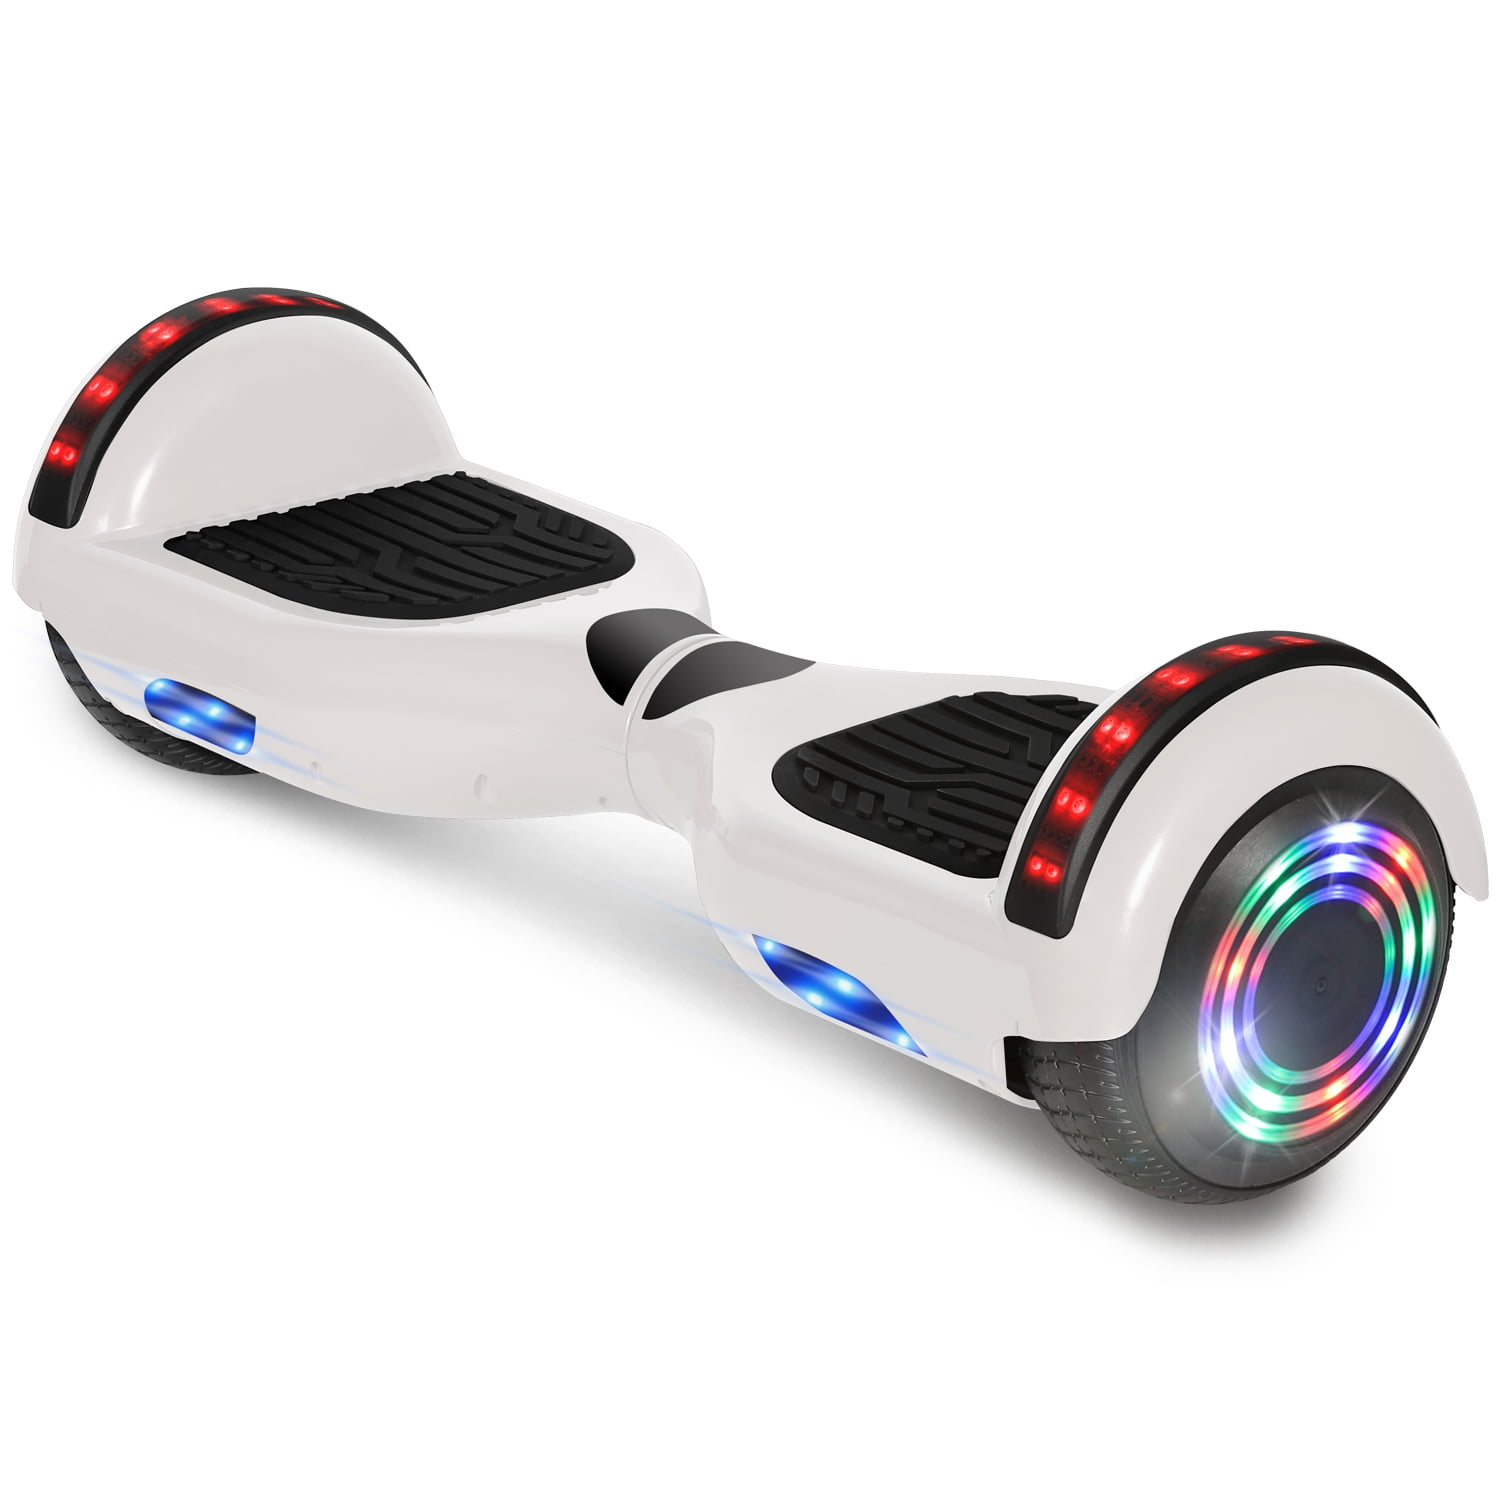 Magic hover 6.5 inch Wheels Original Electric Smart Self Balancing Scooter Hoverboard G1 with Music Speaker LED Lights for Kids adult-UL2272 Certificated 